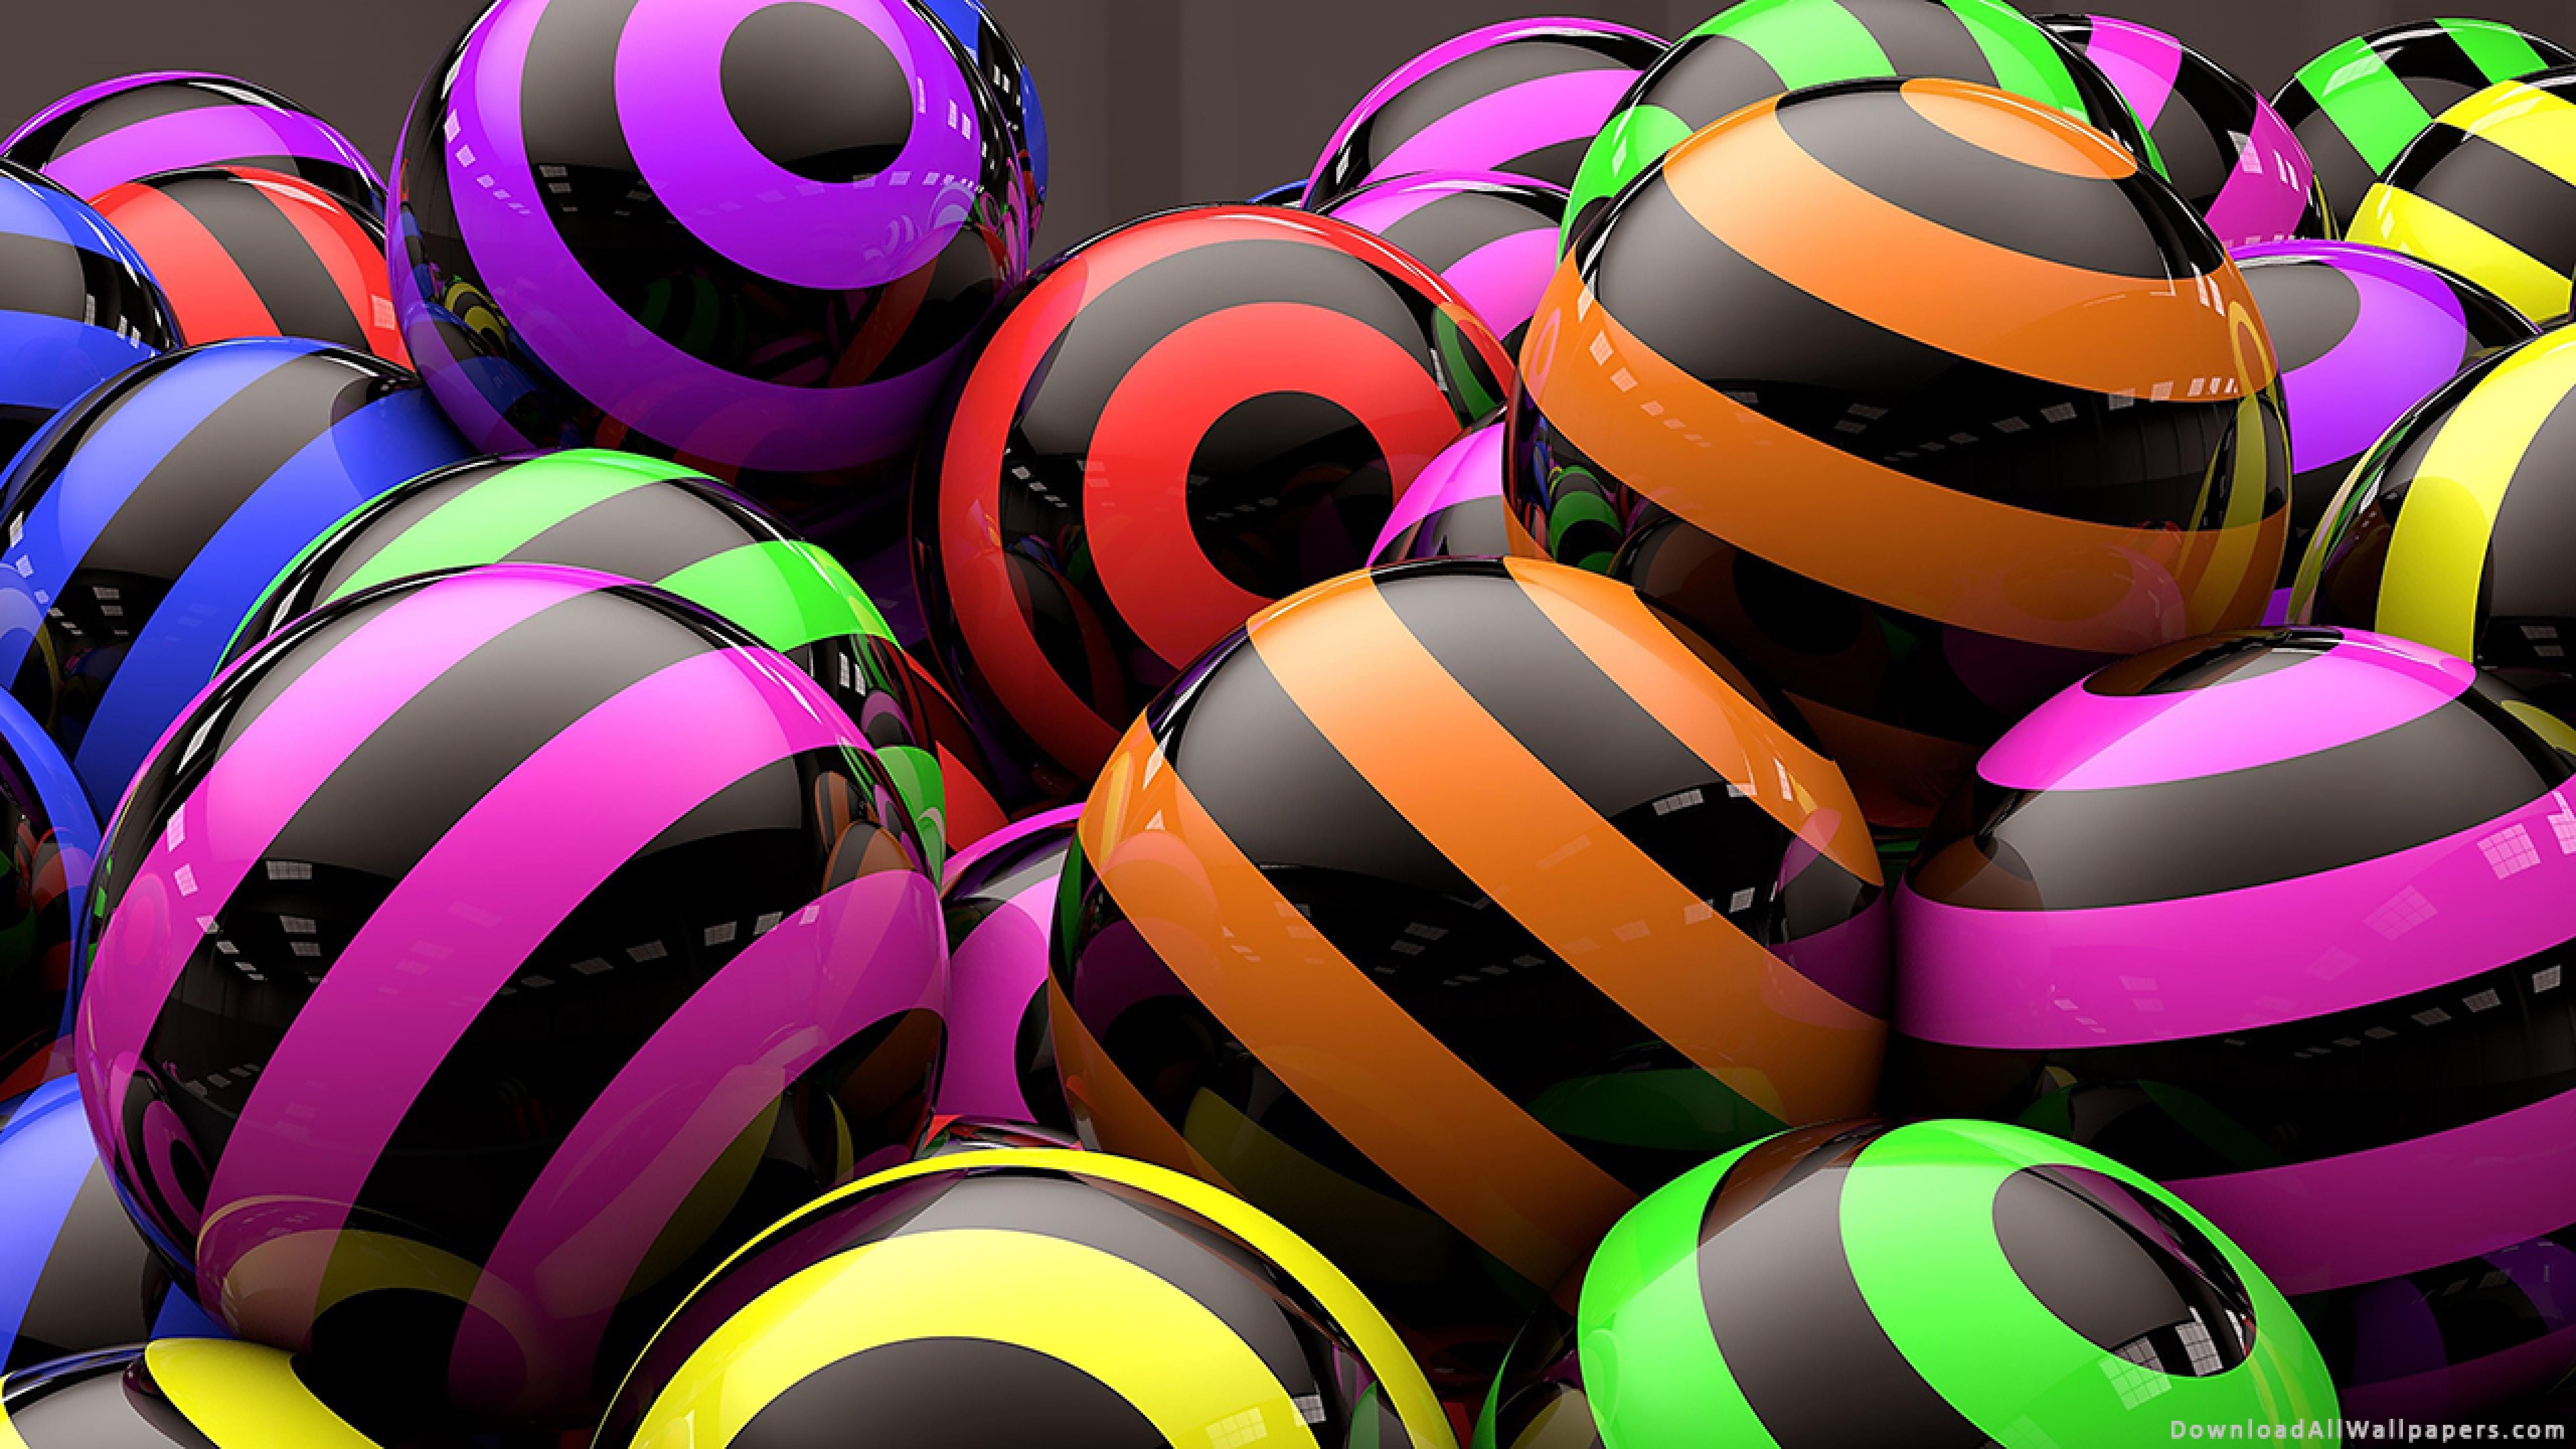 3D Ball, 3D, Ball, Multi Color, Strip, Line, Abstract